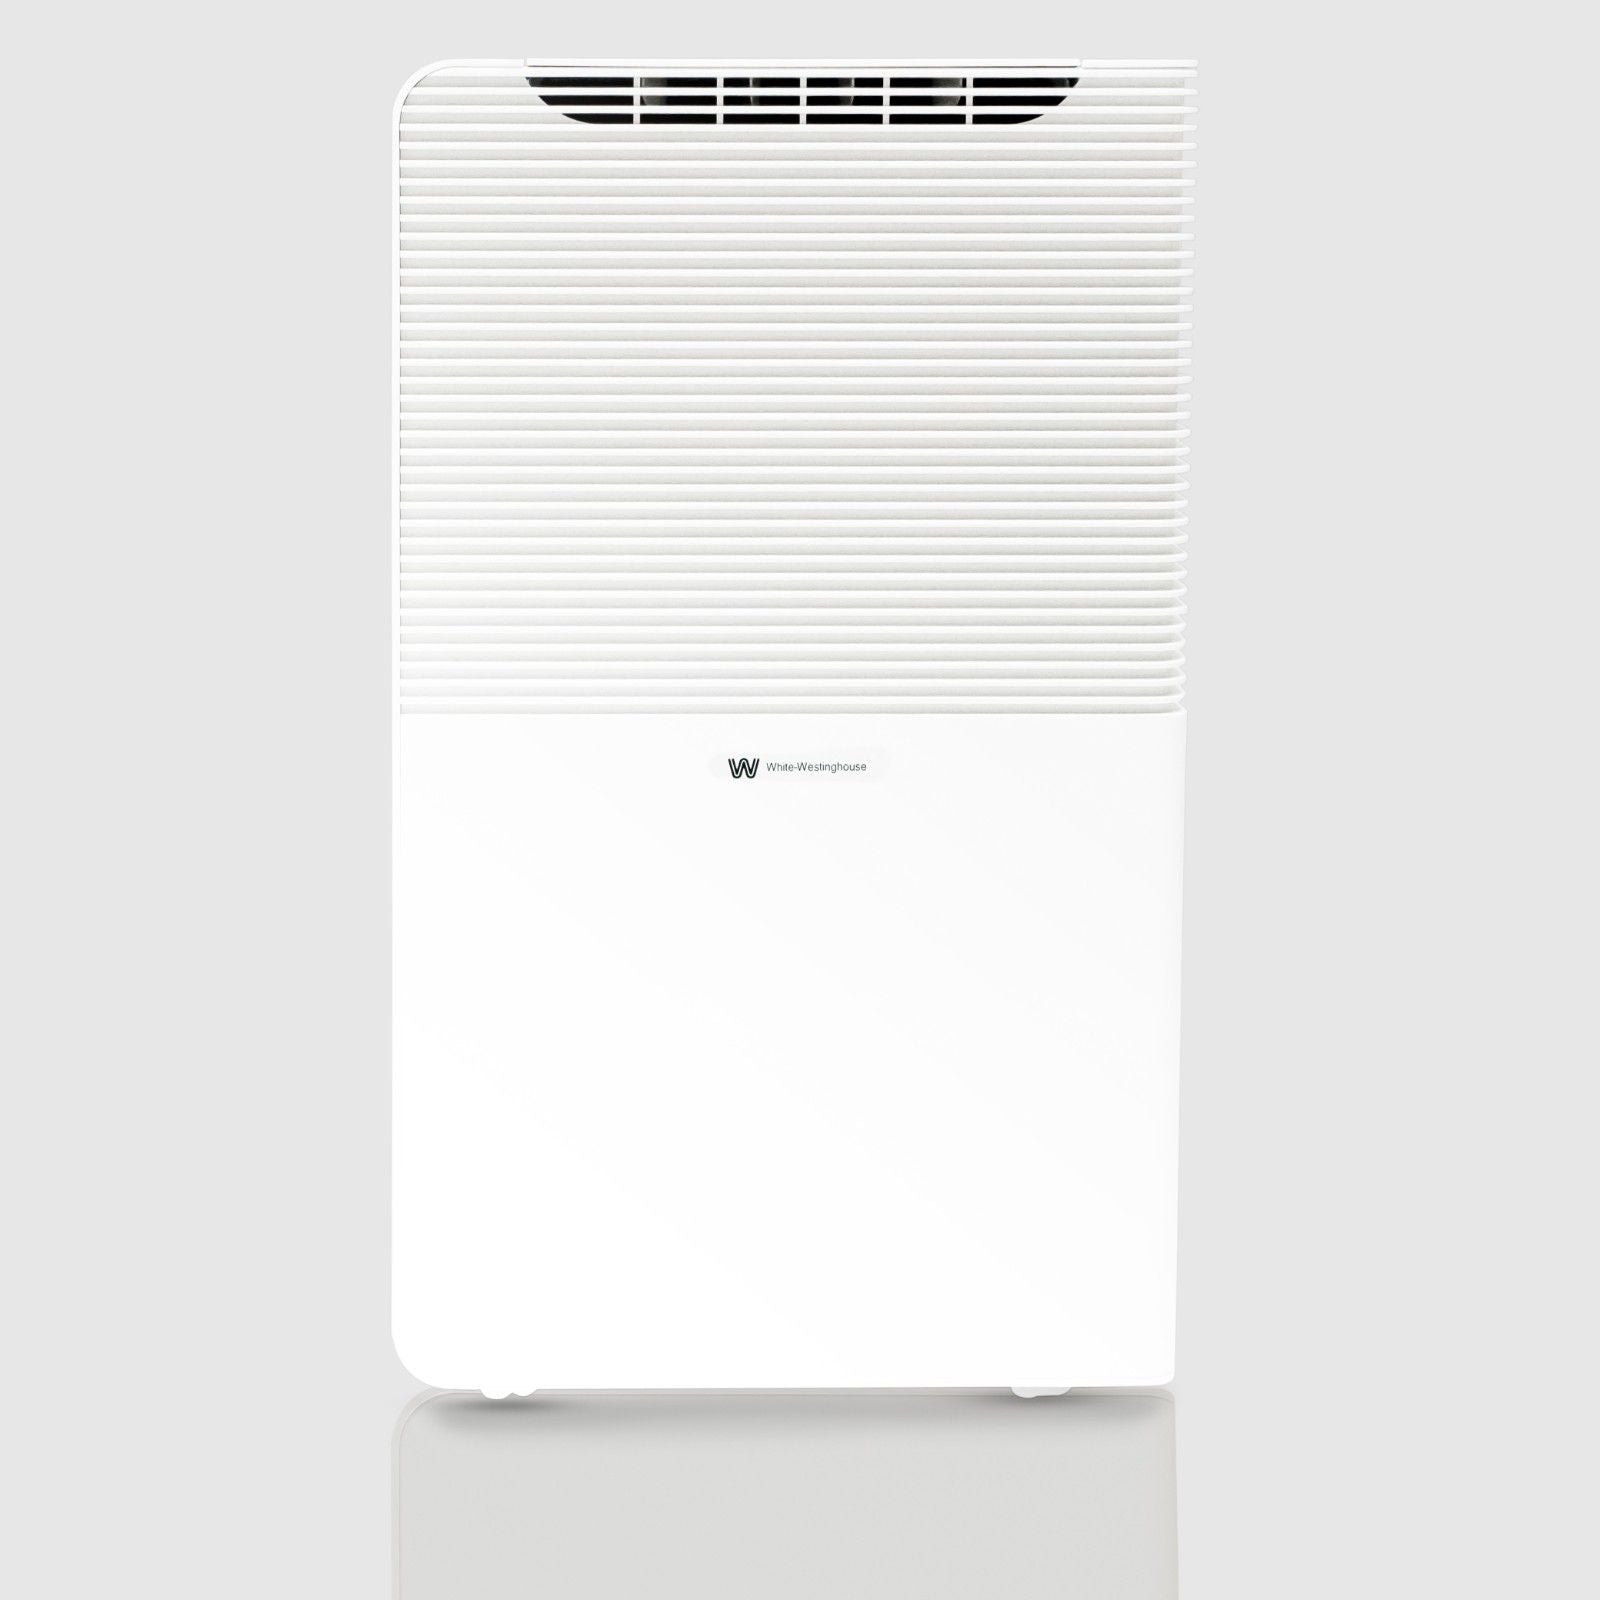 Front view of the White Westinghouse Dehumidifier AWHD40, showcasing the sleek white design with top air vents. The compact and modern design is suitable for maintaining optimal humidity levels in residential and commercial spaces.